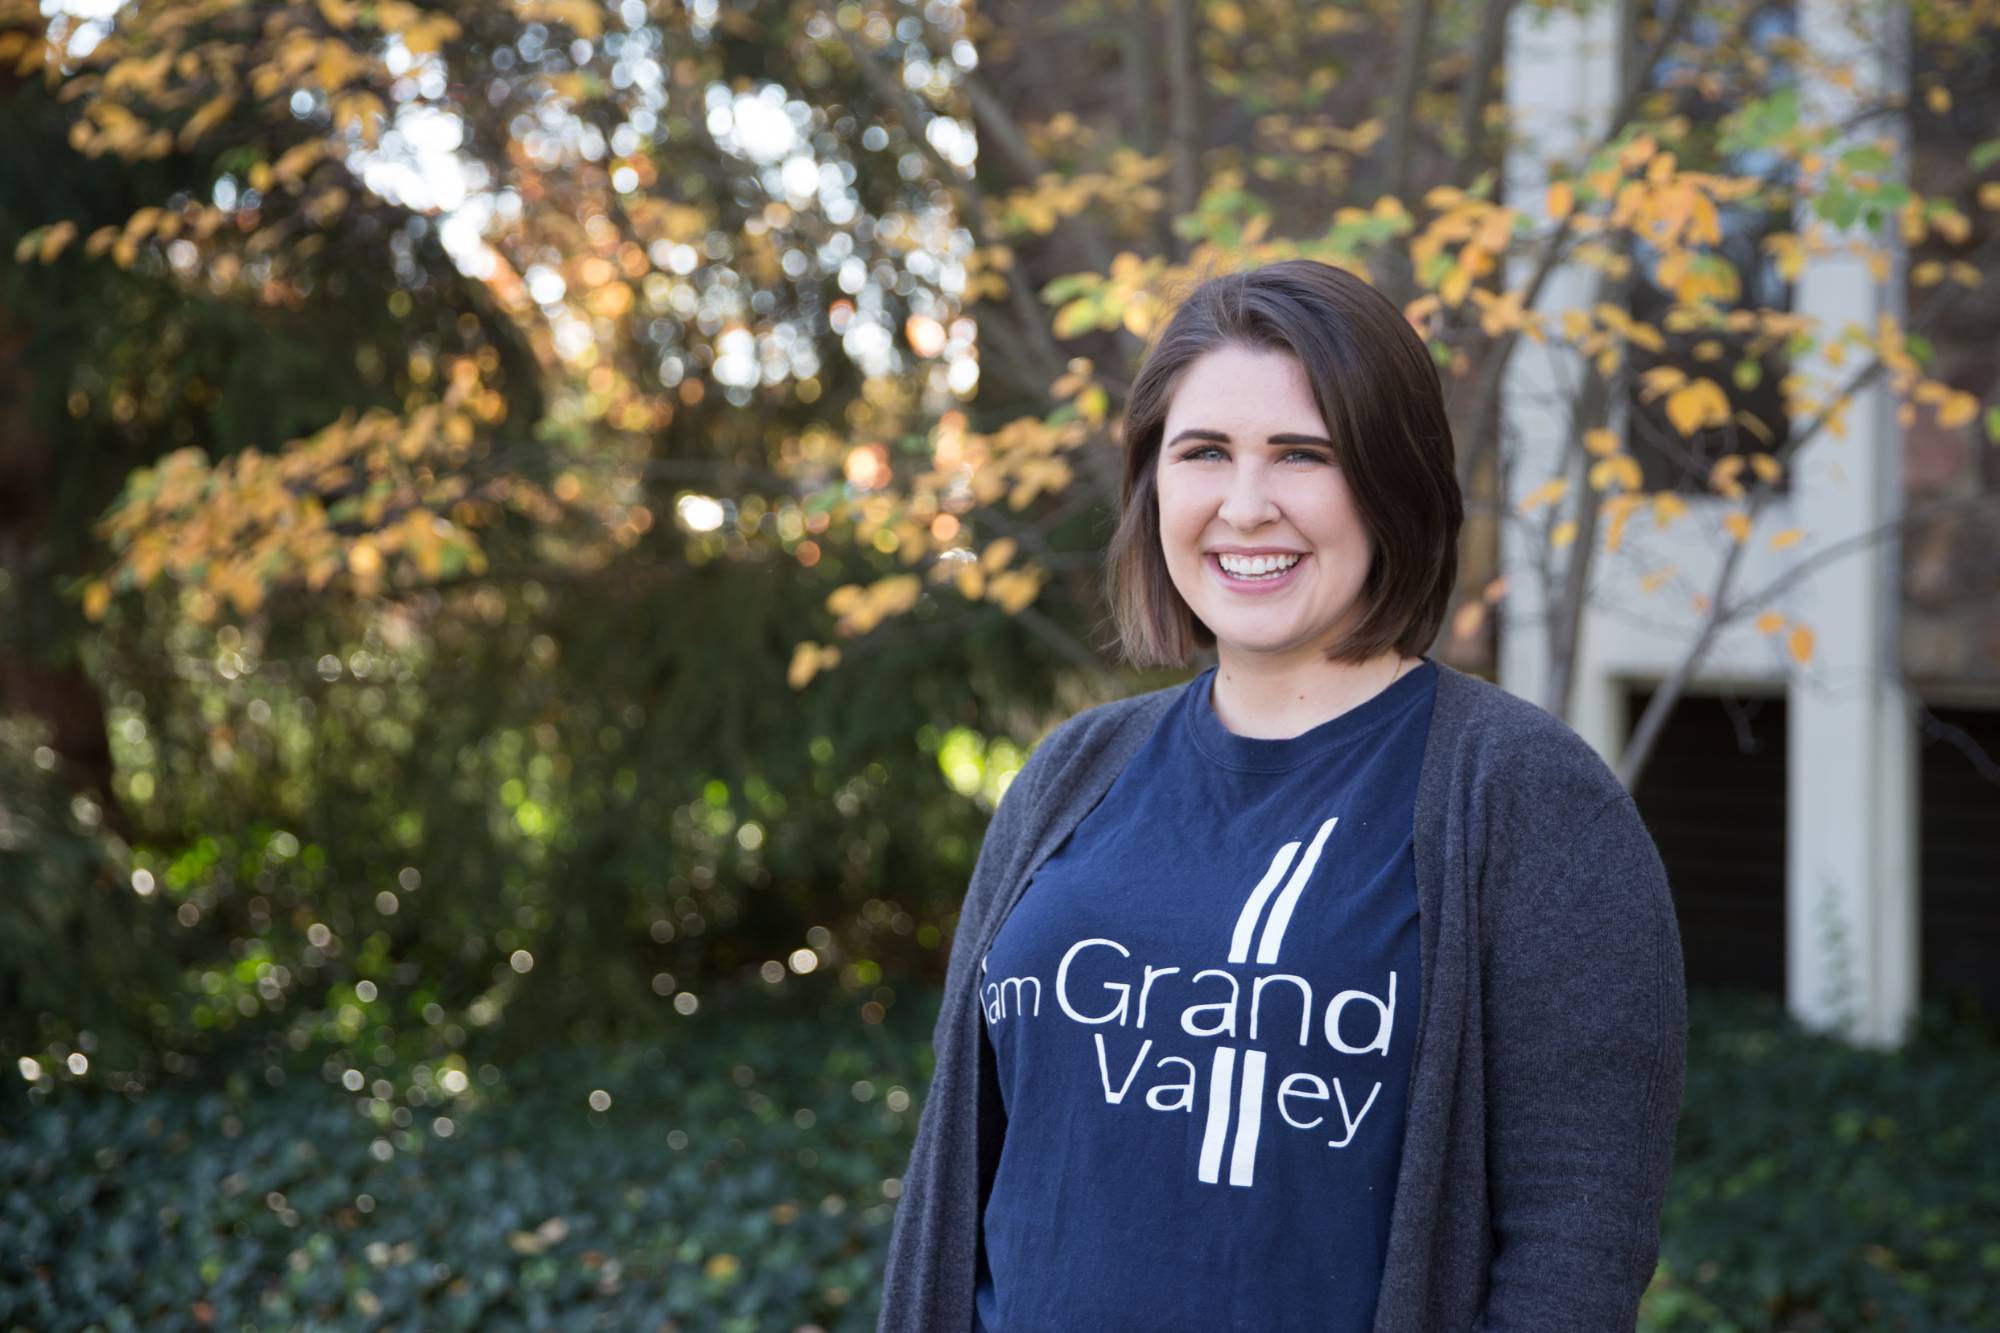 "I am Grand Valley" student recipient head-shot in front of a lake building